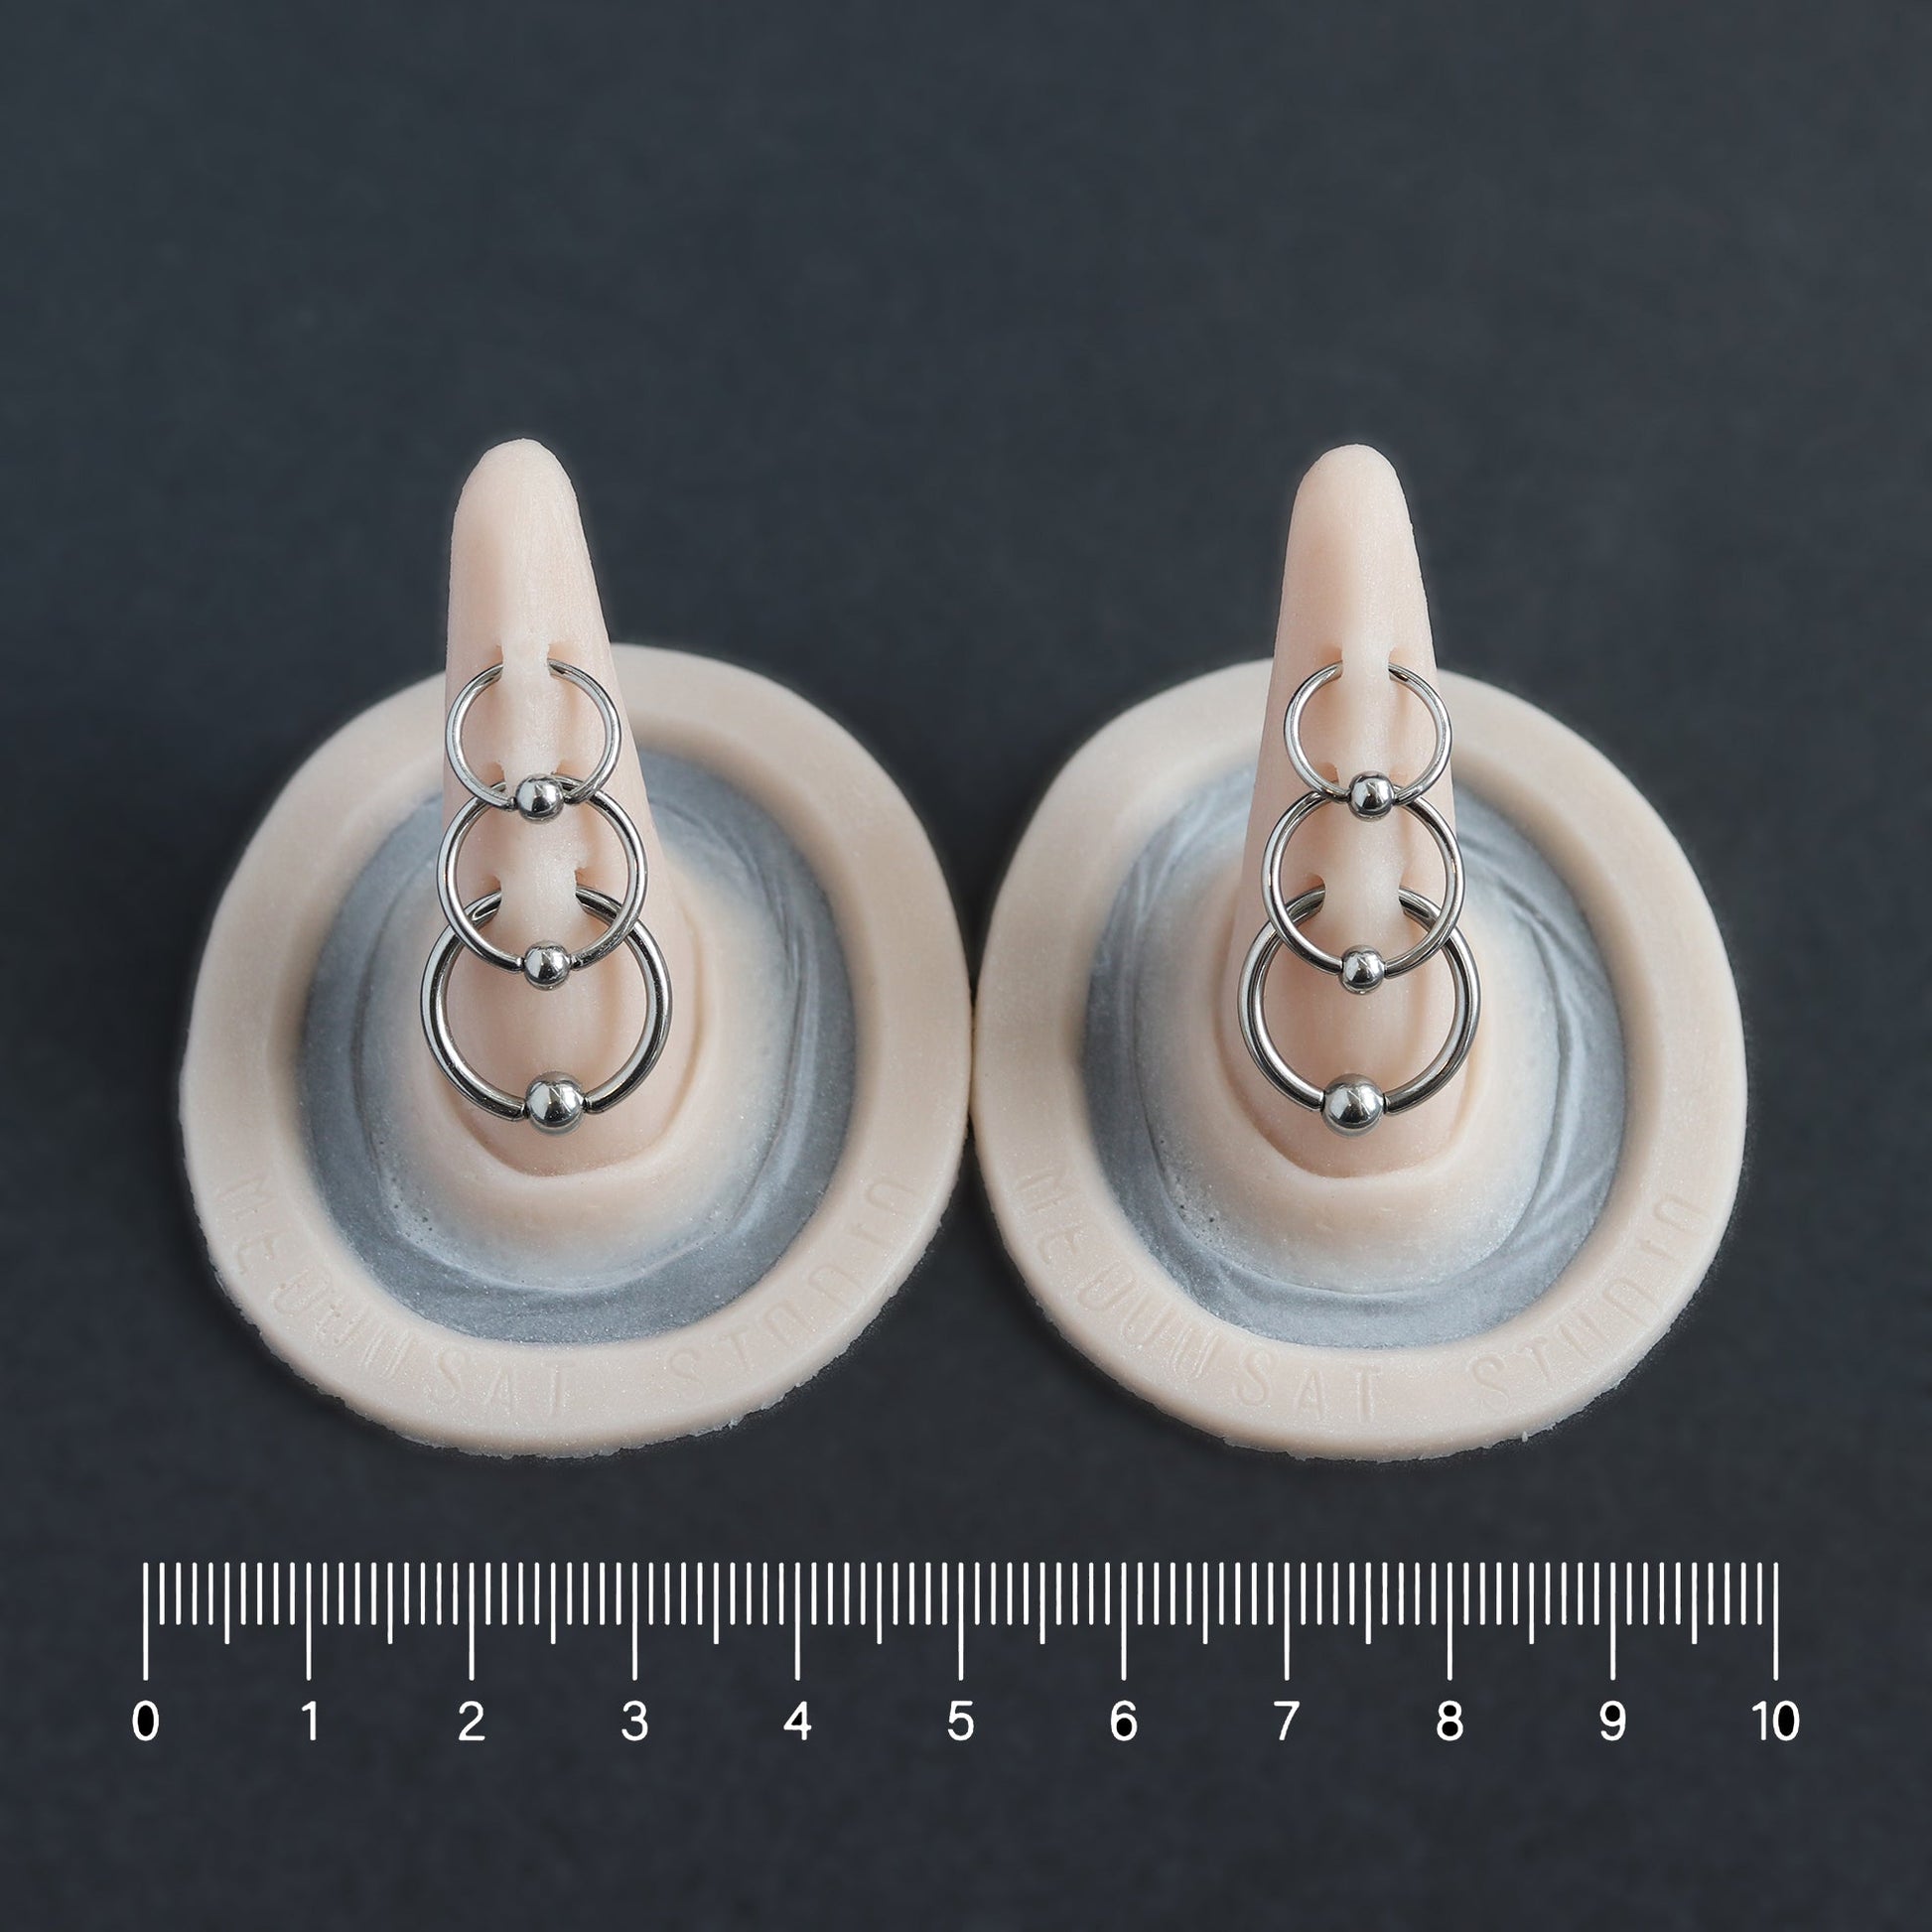 Triple Pierced Horns (Pair) - Silicone makeup prosthetic in vanilla shade on a black surface with a ruler